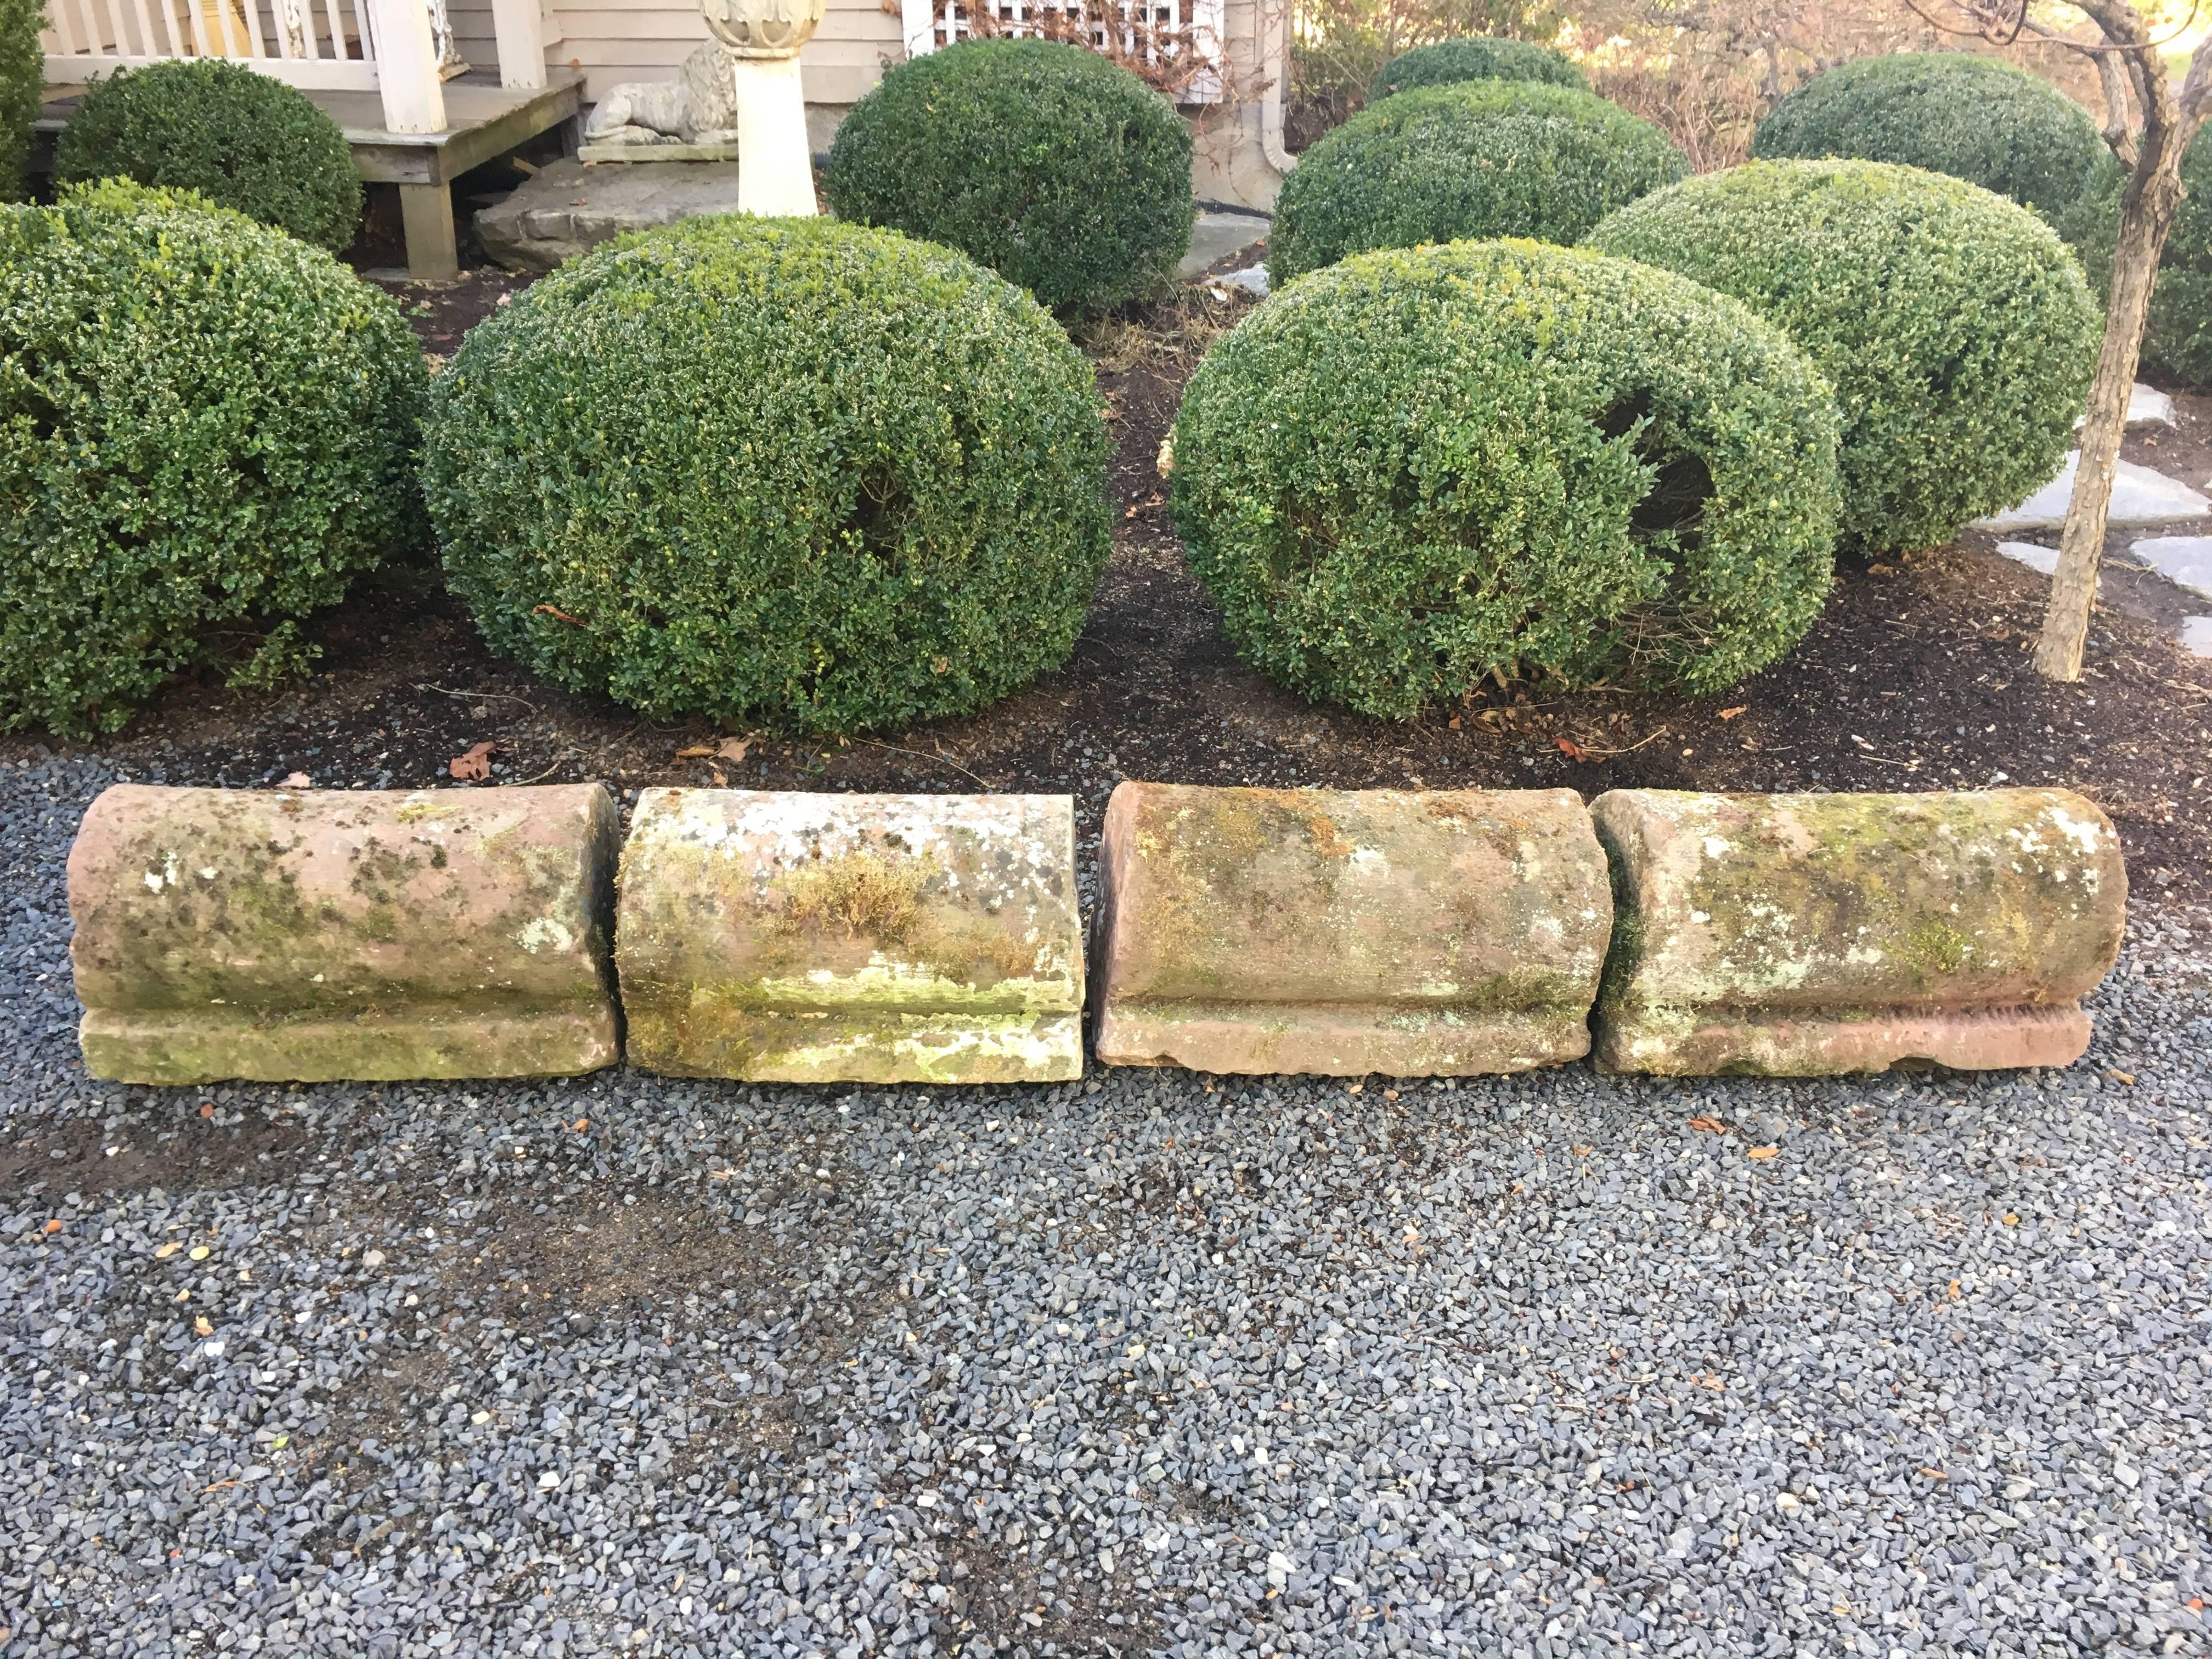 We found this set of four hand-carved pink sandstone curb stones in Northern France, covered in moss and lichen and begging to come to the U.S. They look marvelous placed end-to-end or spaced with short runs of low hedging in between them.